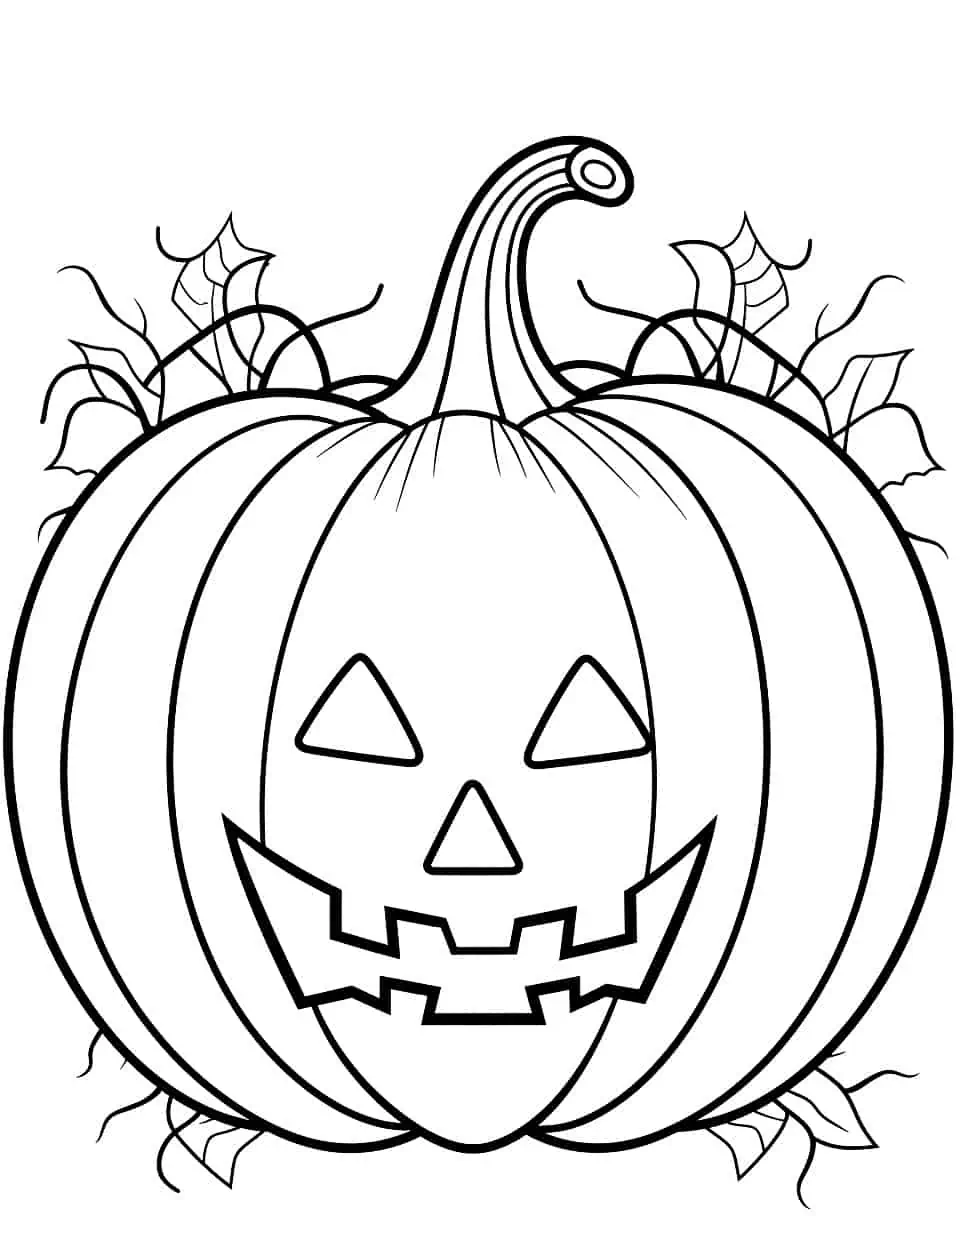 Creepy Pumpkin Coloring Page - A pumpkin with a menacing grin, ideal for a spooky Halloween theme.